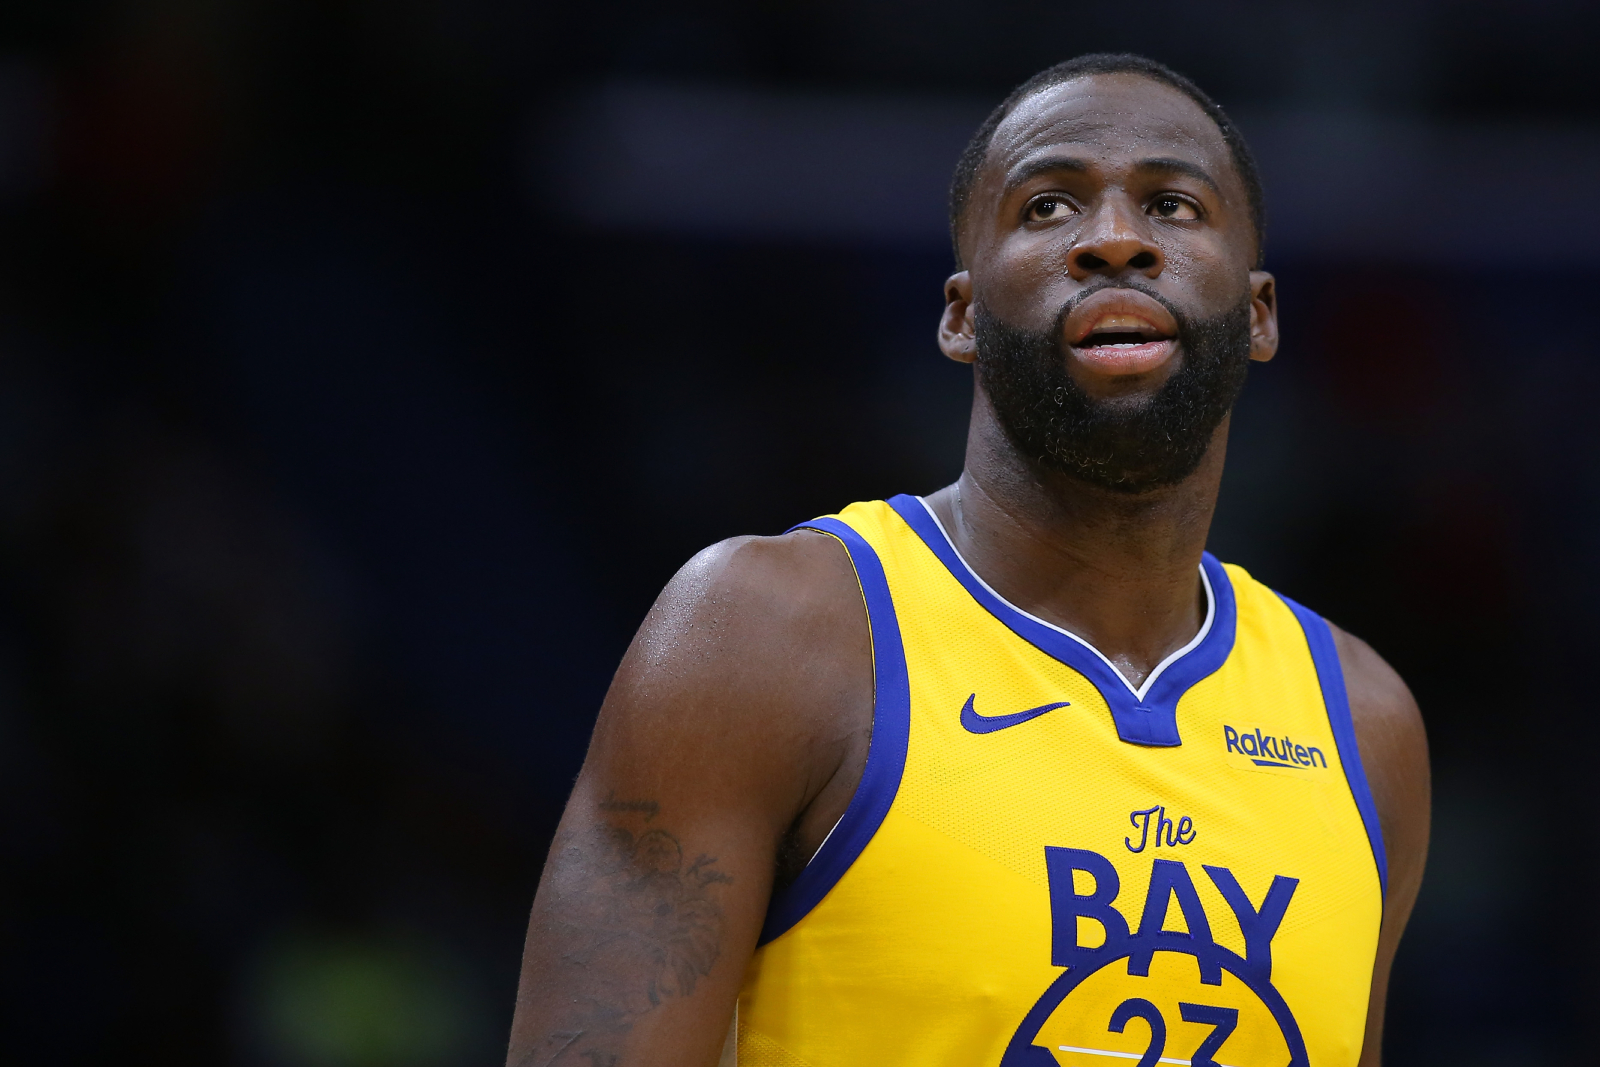 Draymond Green hasn't played for the Golden State Warriors yet, but he just recently took a subtle shot at head coach Steve Kerr.